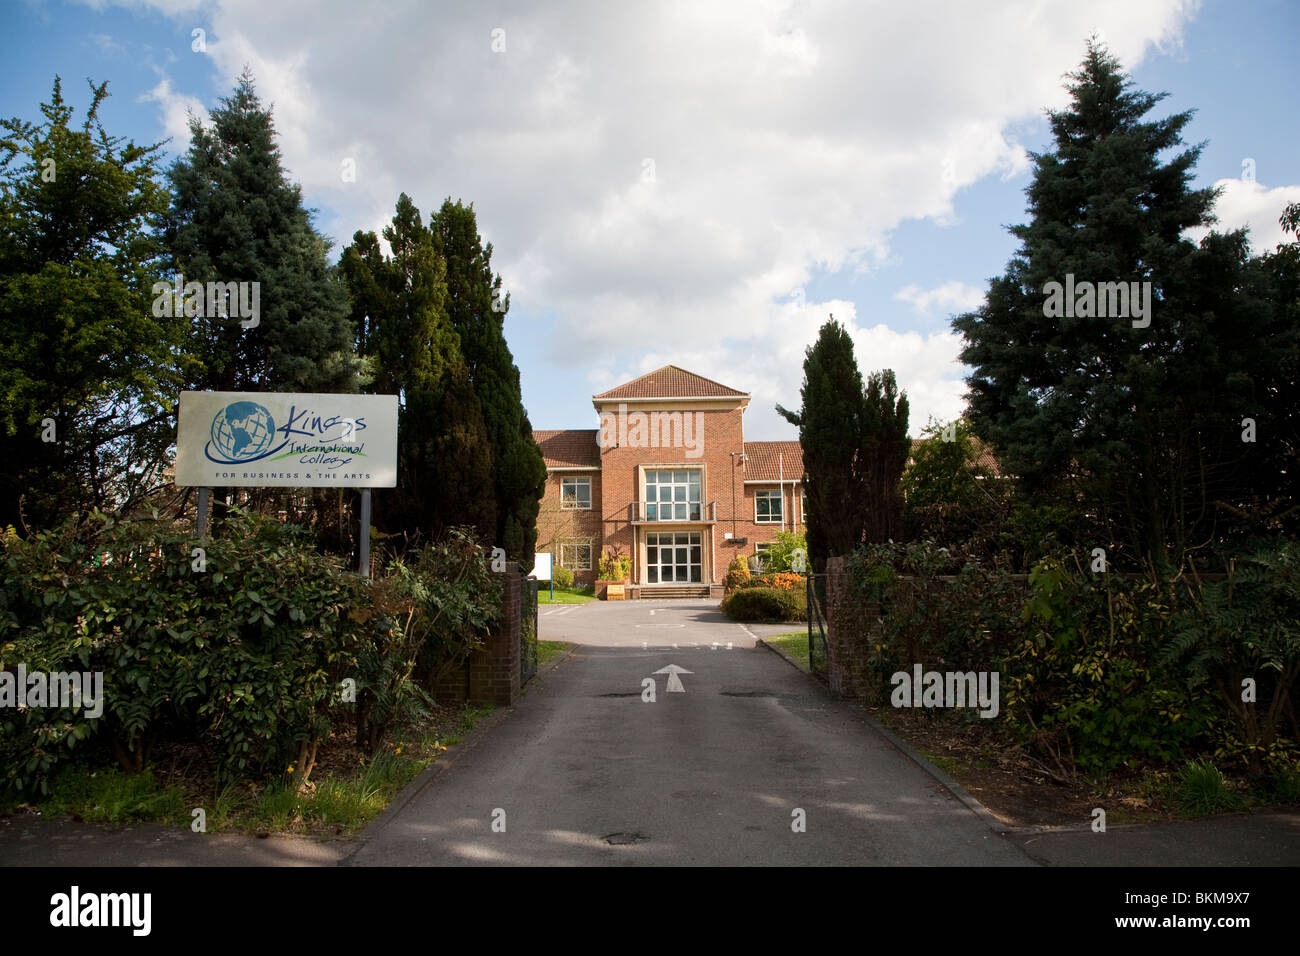 Kings International College, Camberley, Banque D'Images